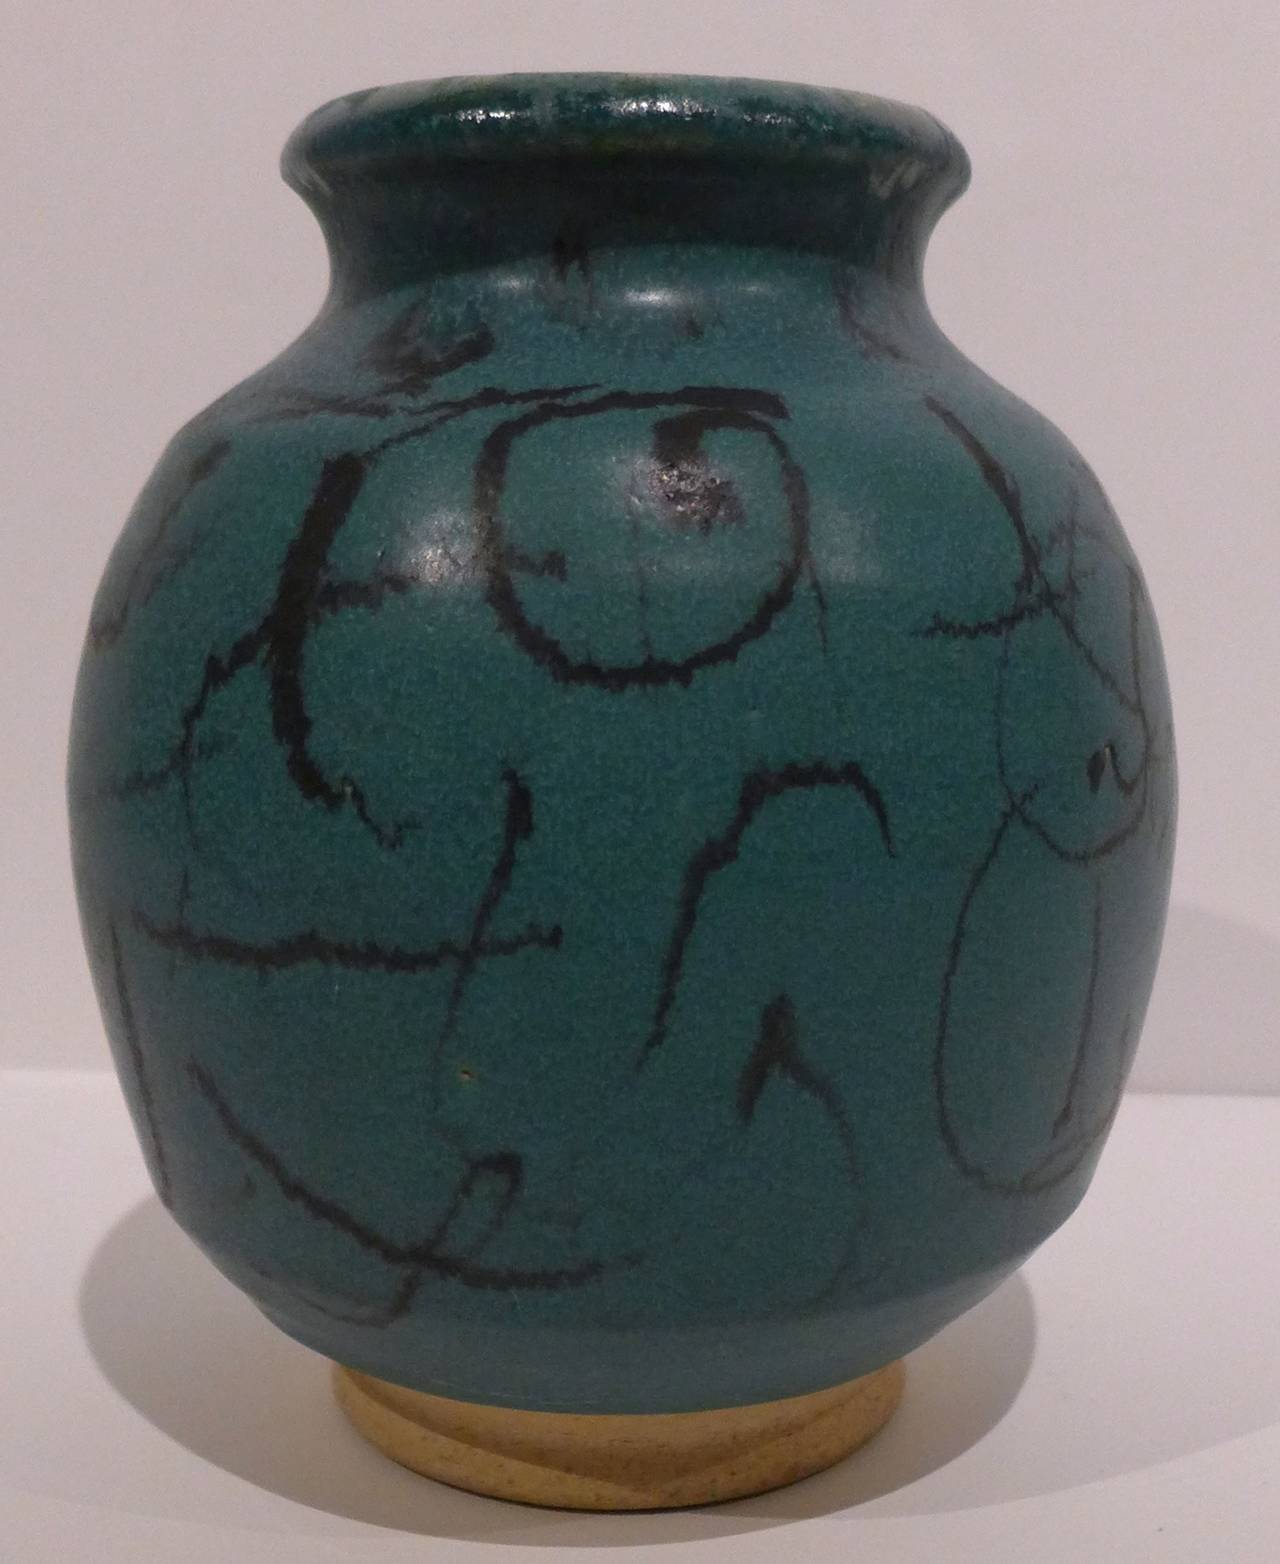 Bulbous stoneware vase with unglazed foot and flaring rim, with abstract painted pattern in the glaze. By renowned American ceramic artist Antonio Prieto (1912-1967). After studying at Alfred University, Prieto moved to California, where he taught